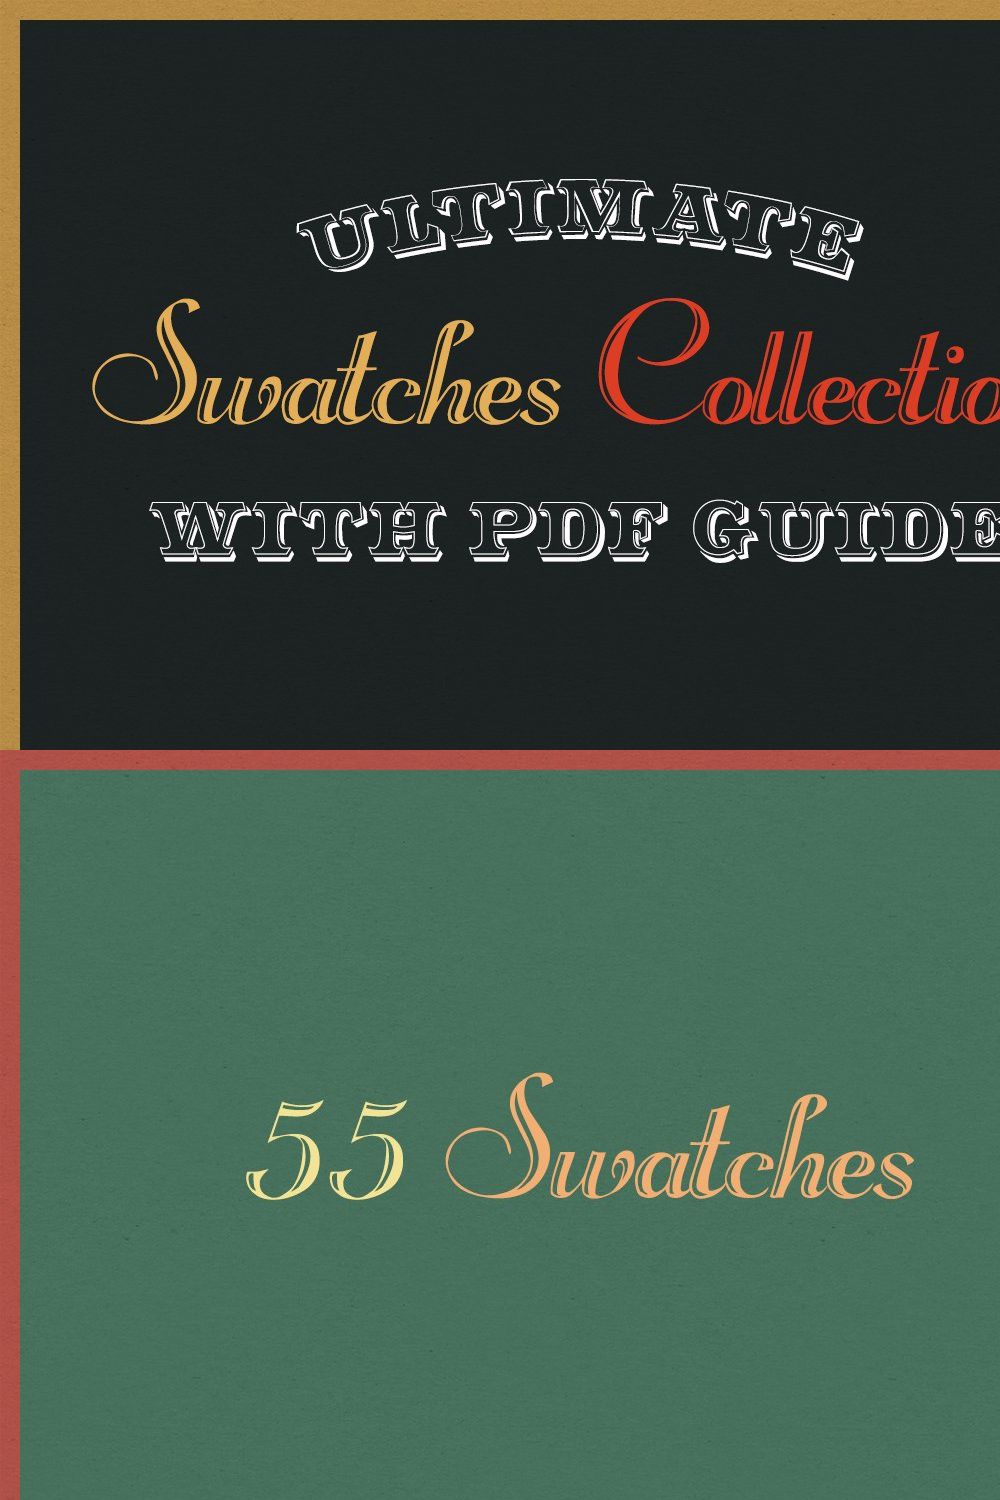 Ultimate Swatches Collection pinterest preview image.